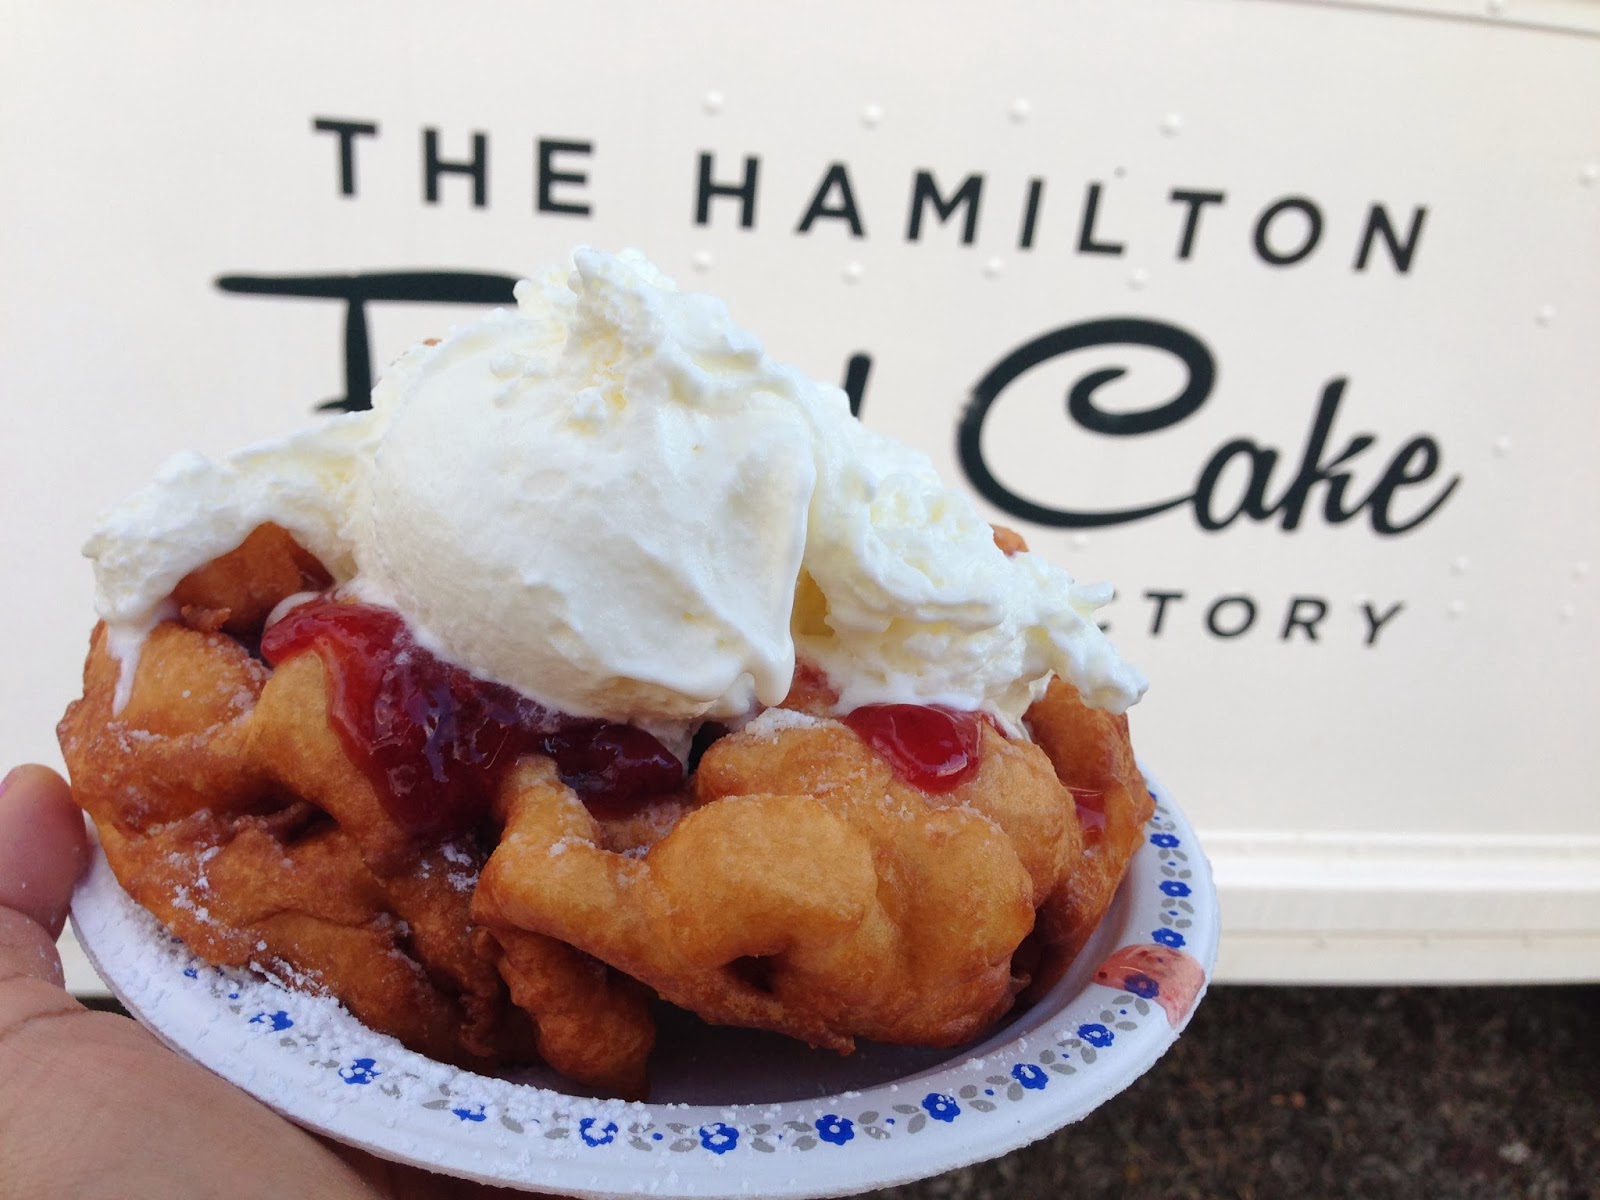 First Impression: The Hamilton Funnel Cake Factory